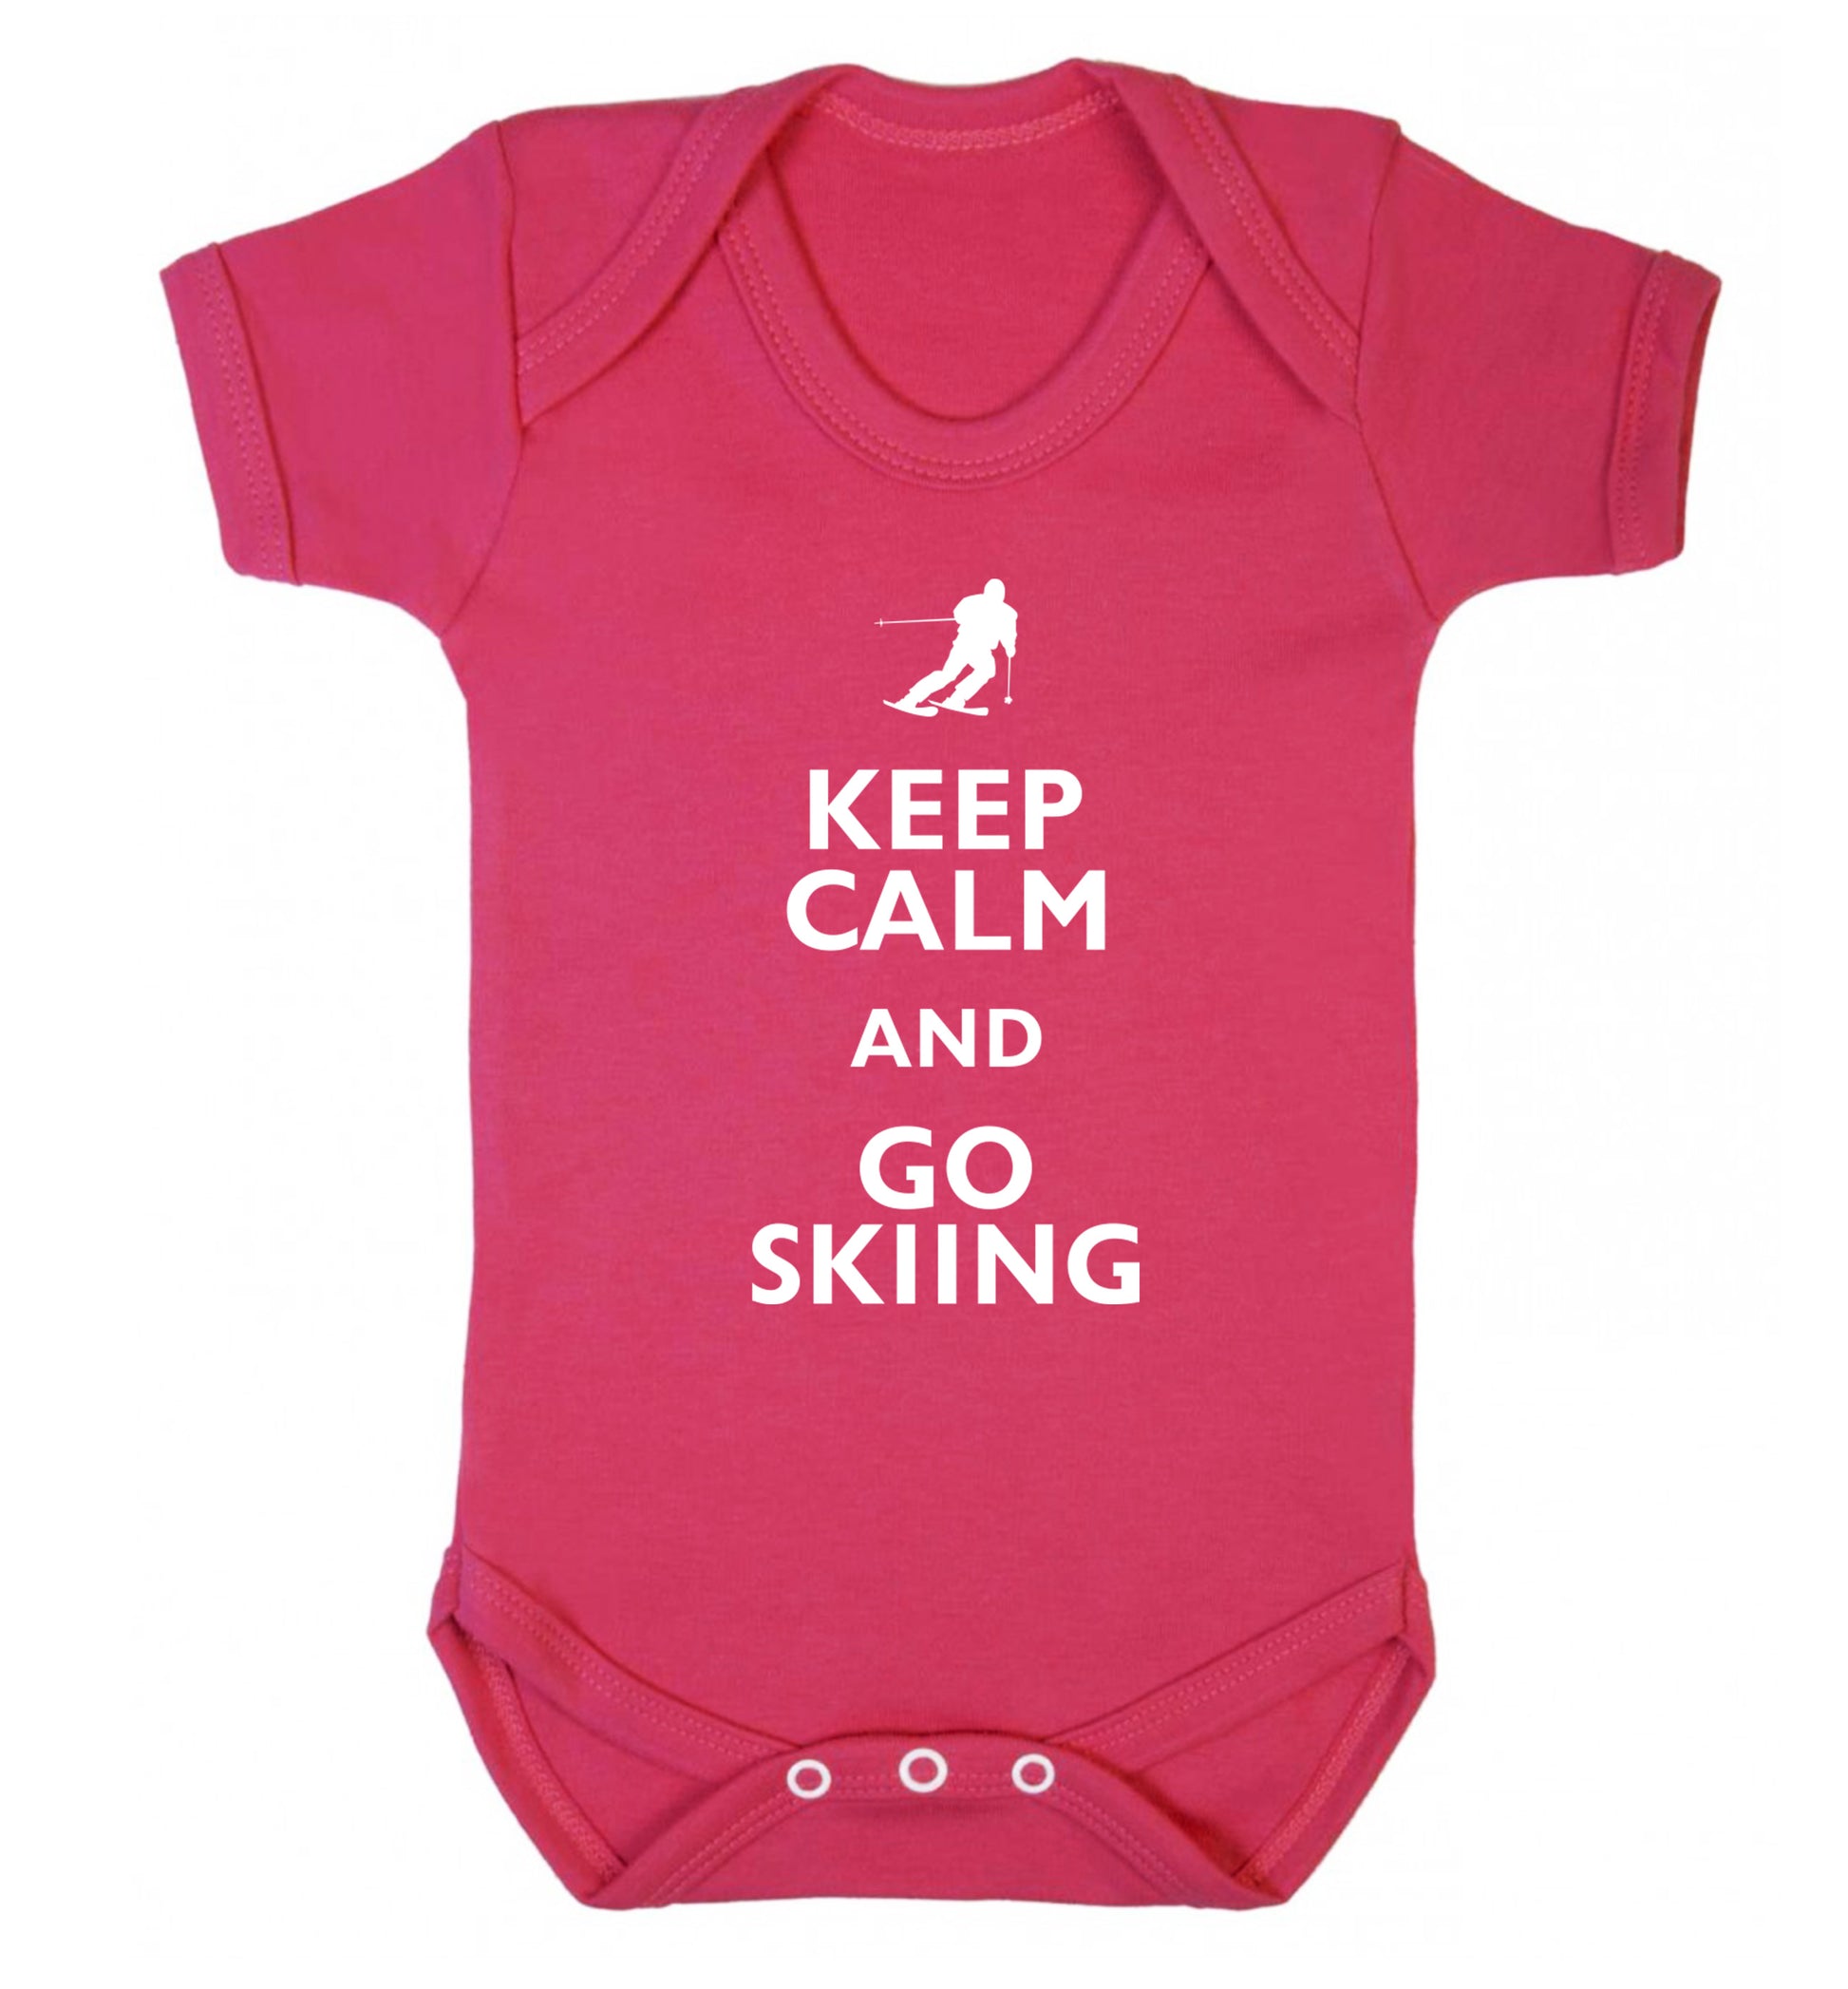 Keep calm and go skiing Baby Vest dark pink 18-24 months